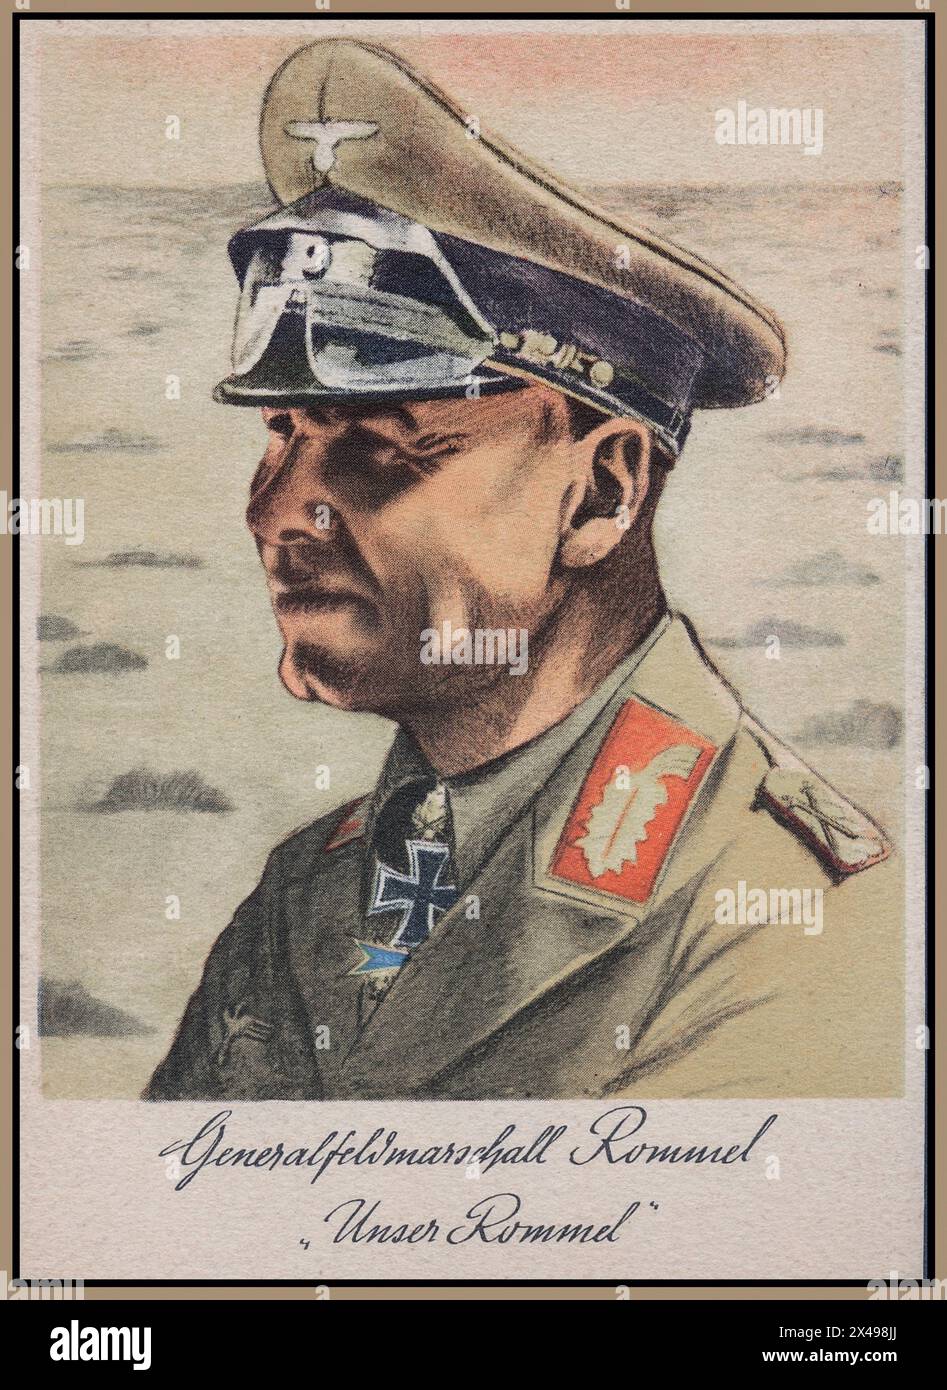 WW2 ROMMEL General Field Marshal Rommel 'OUR ROMMEL''Unser Rommel' Johannes Erwin Eugen Rommel 15 November 1891 – 14 October 1944) was a German Generalfeldmarschall (field marshal) during World War II. Popularly known as the Desert Fox ,he served in the Wehrmacht (armed forces) of Nazi Germany.. Seen here in North Africa tropical military uniform with his trademark visor goggles.World War II Second World War North Africa Campaign Stock Photo